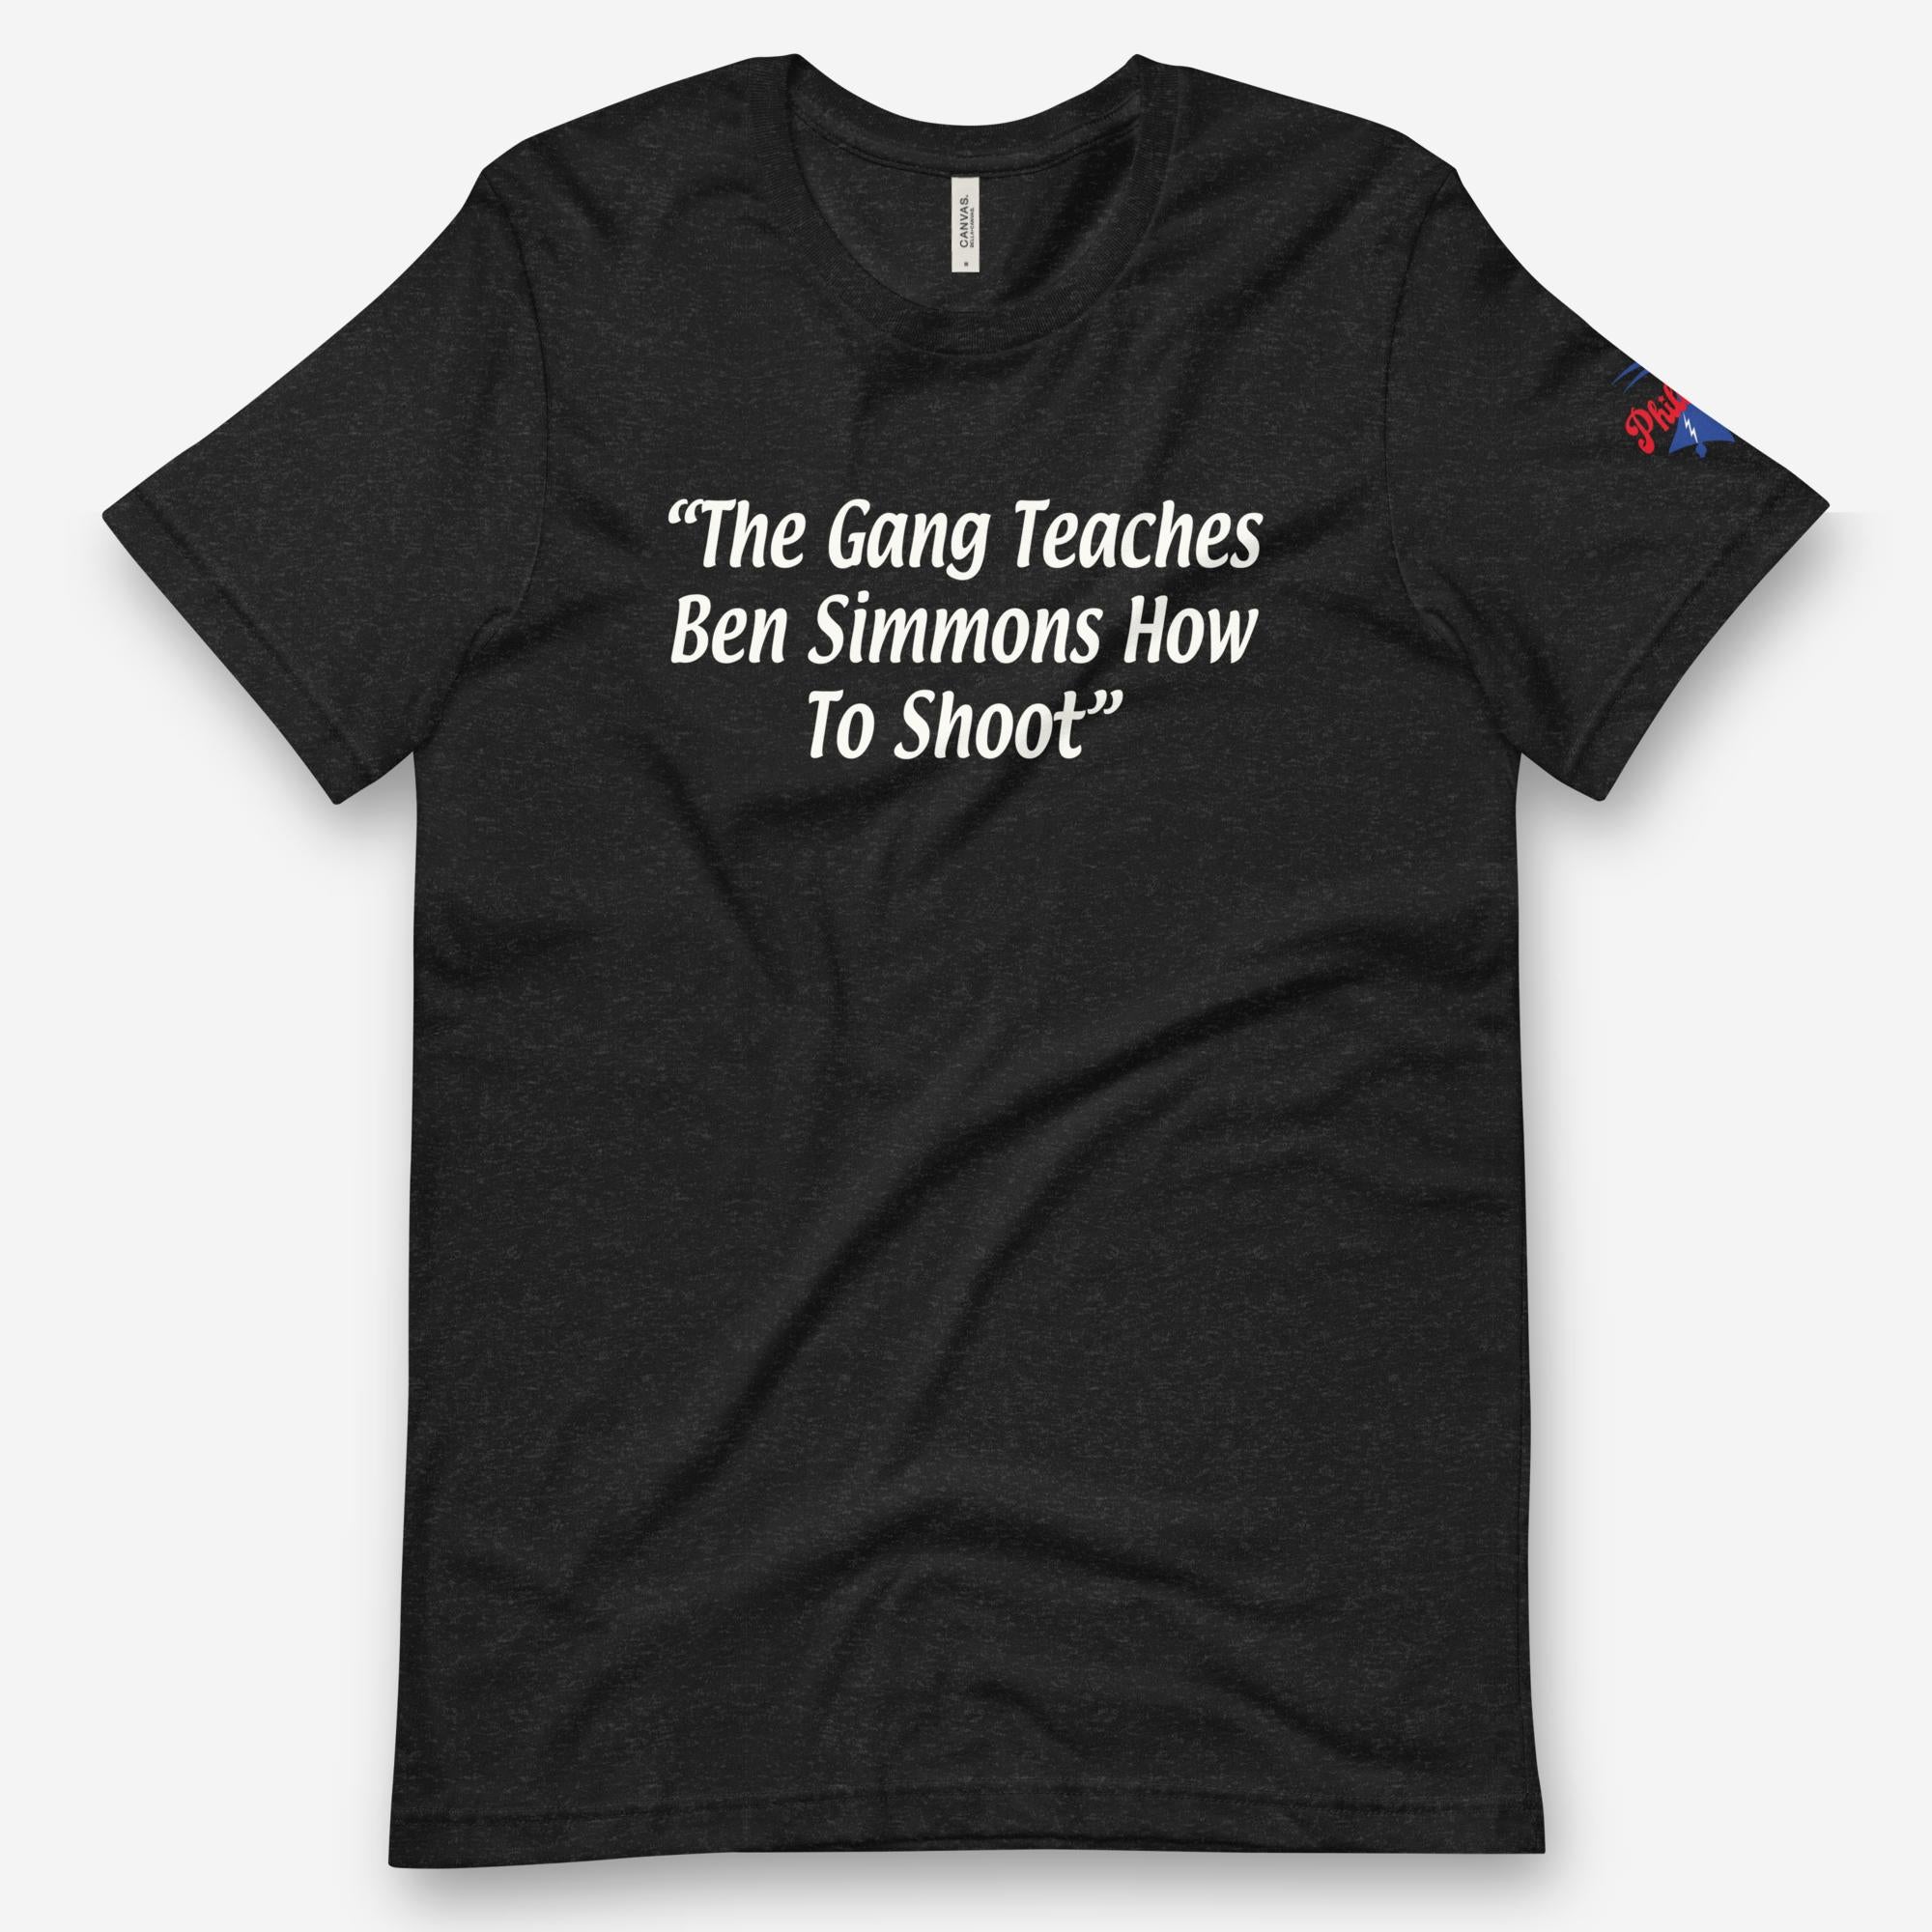 "The Gang Teaches Ben Simmons How to Shoot" Tee